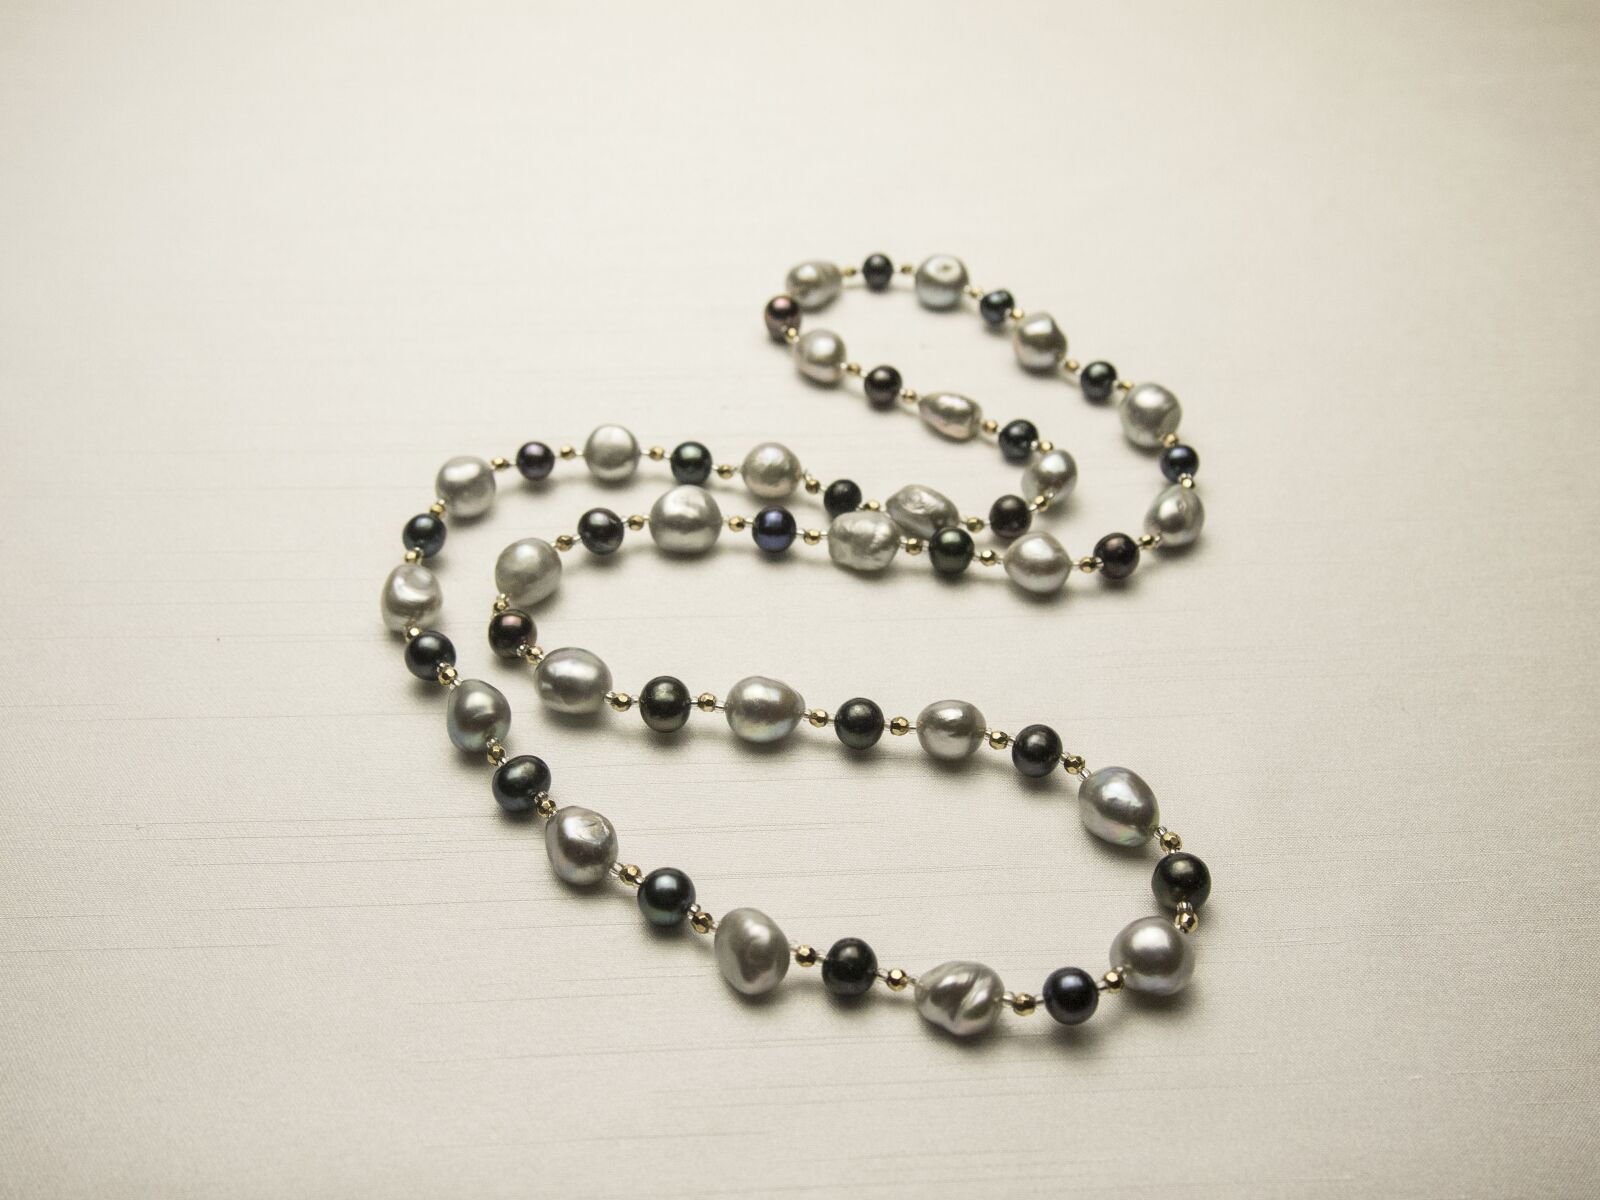 Olympus PEN E-PL2 sample photo. Freshwater pearl, necklace, accessories photography